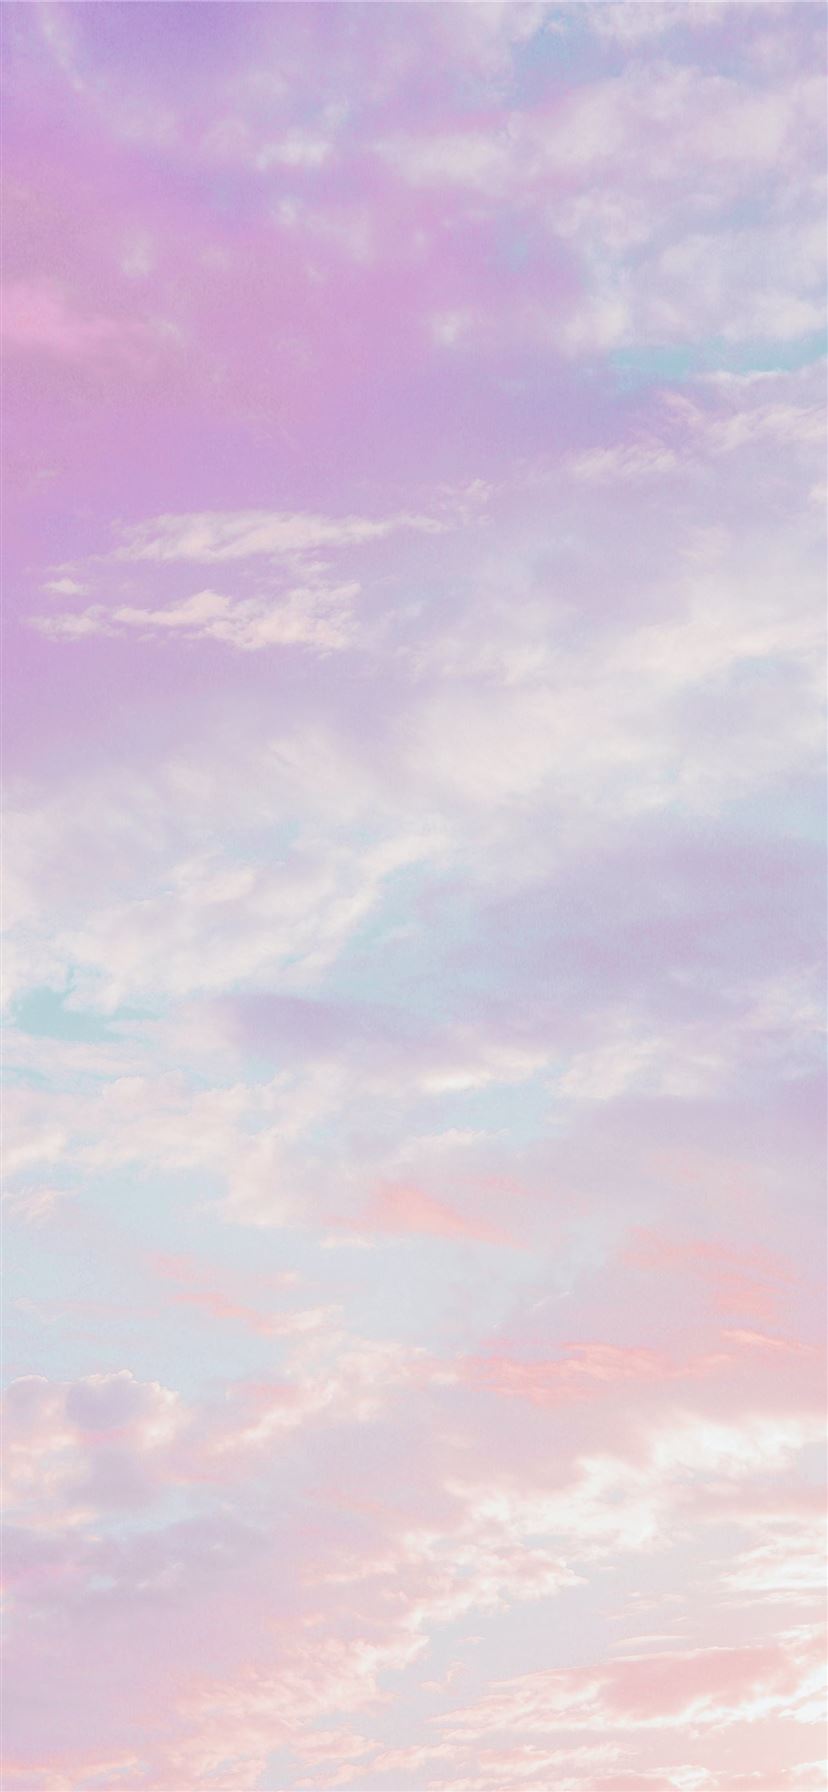 Pastel Sky iPhone Wallpaper  The Best Wallpaper Ideas Thatll Make Your  Phone Look Aesthetically Pleasing  POPSUGAR Tech Photo 34